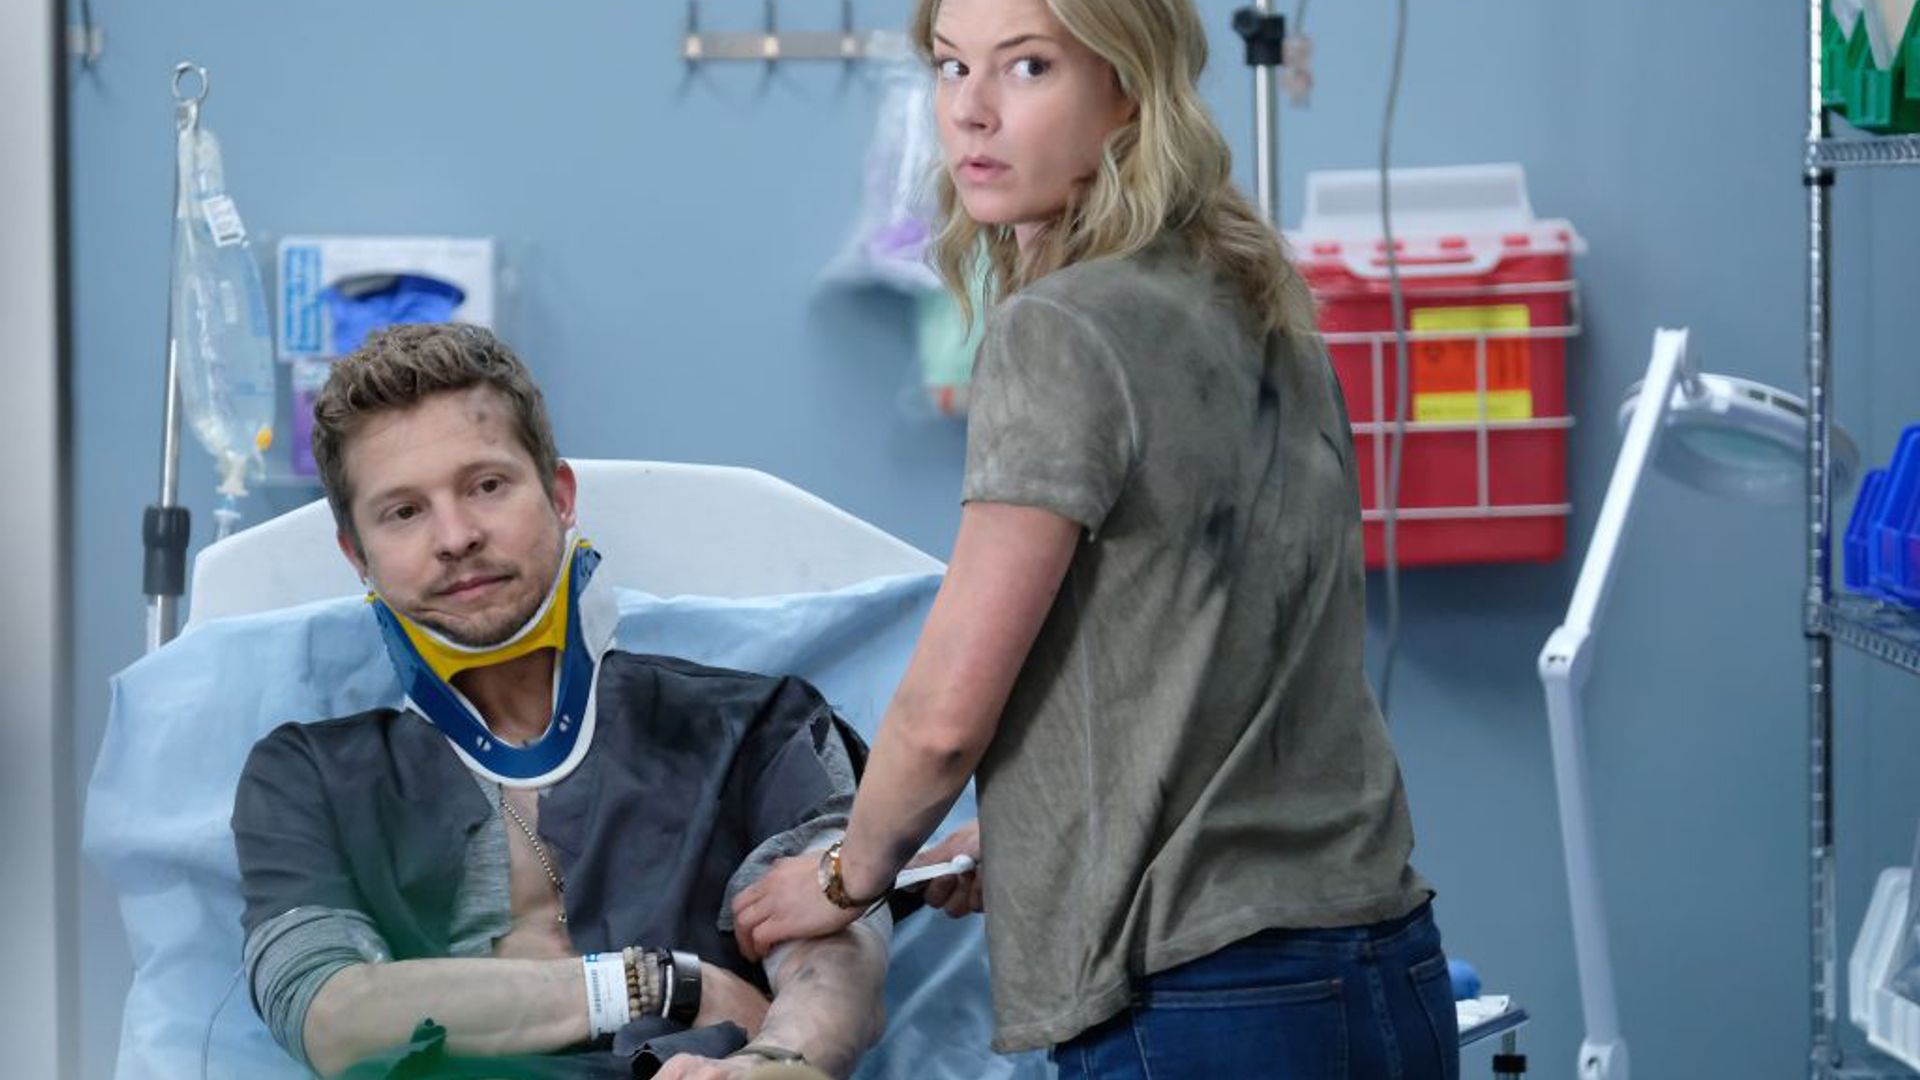 Matt Czuchry and Emily VanCamp in the "From the Ashes" season premiere episode of The Resident